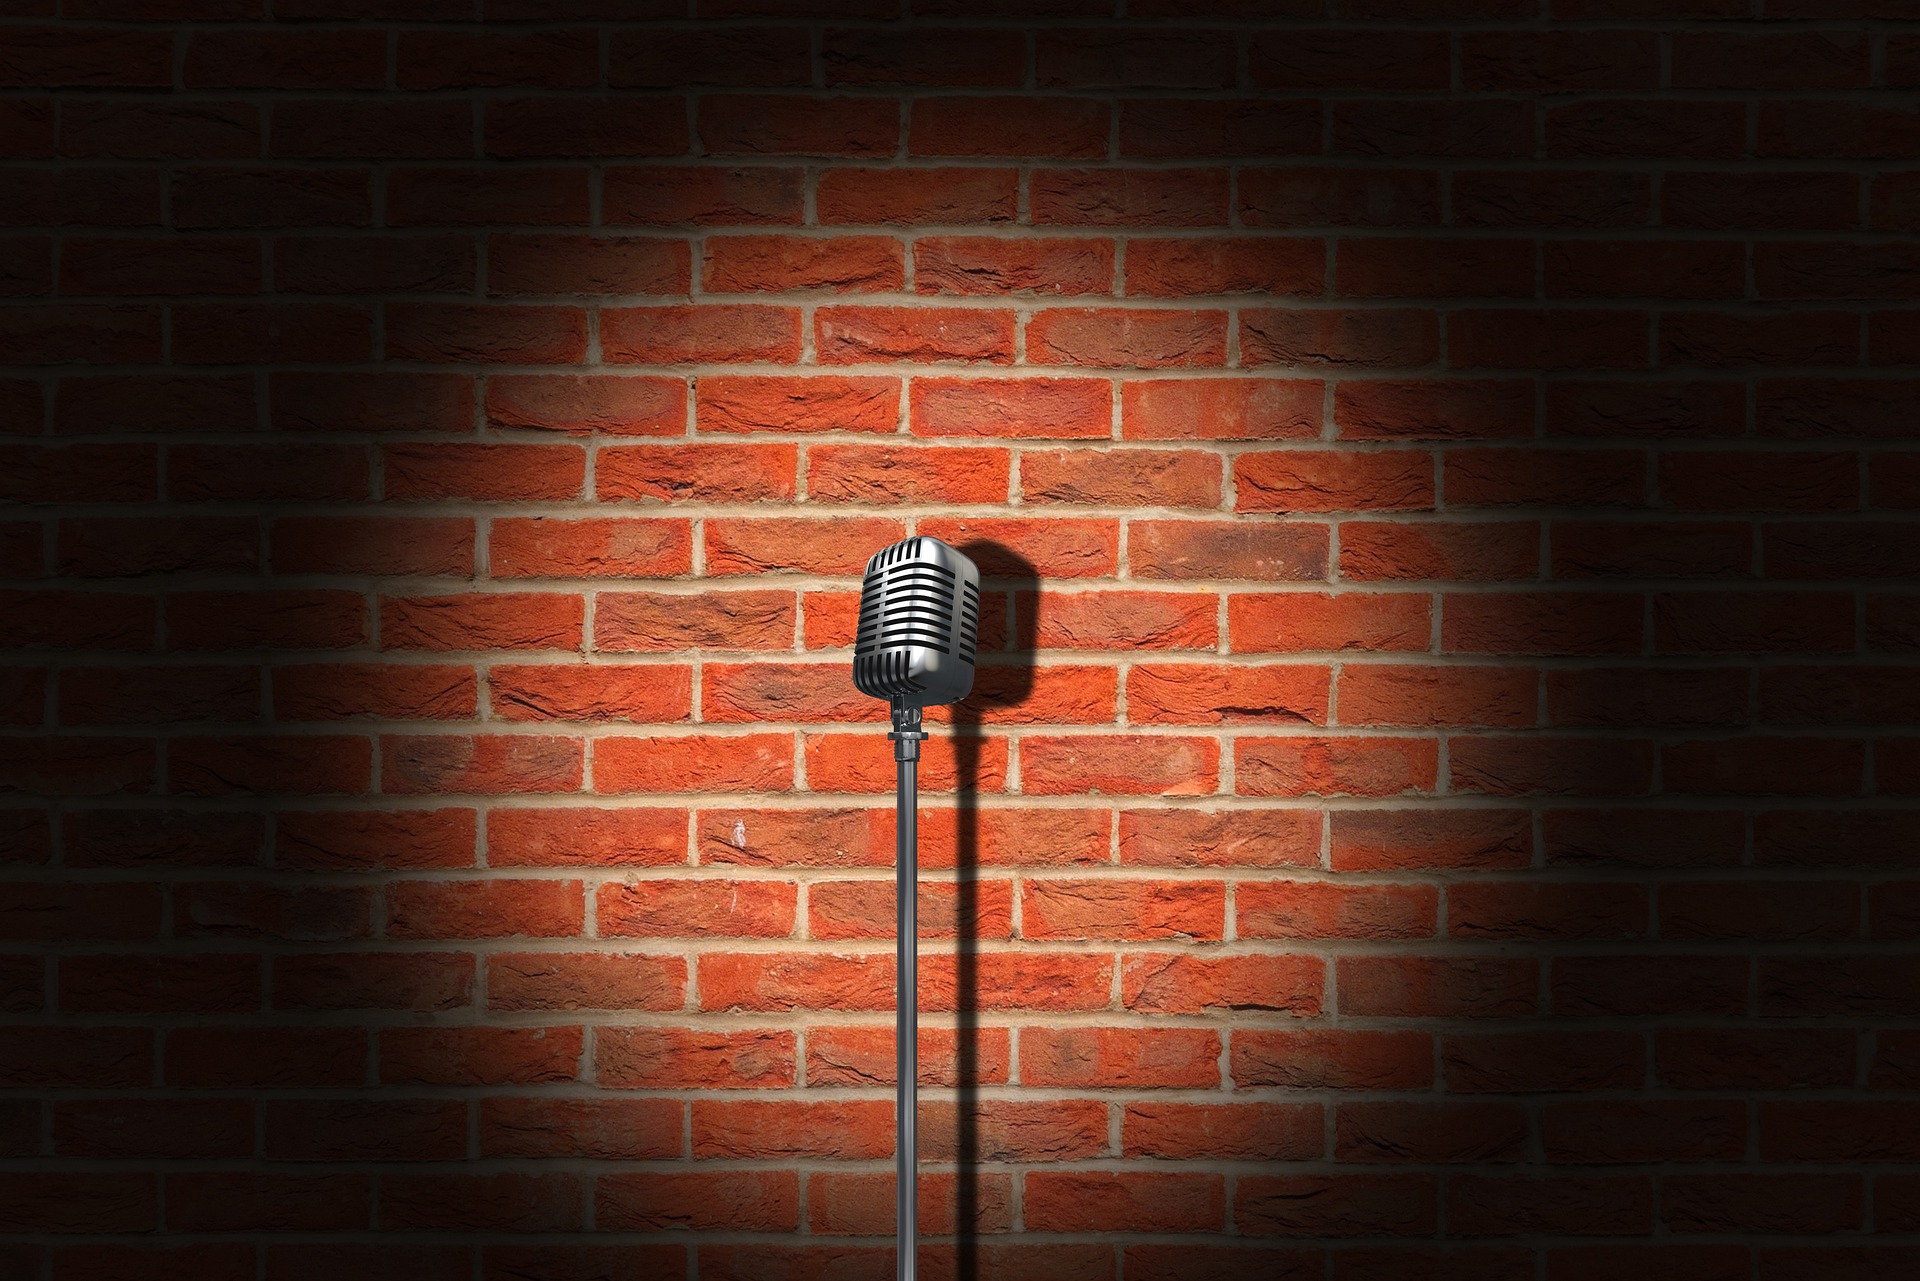 Microphone For Comedian At Comedy Club